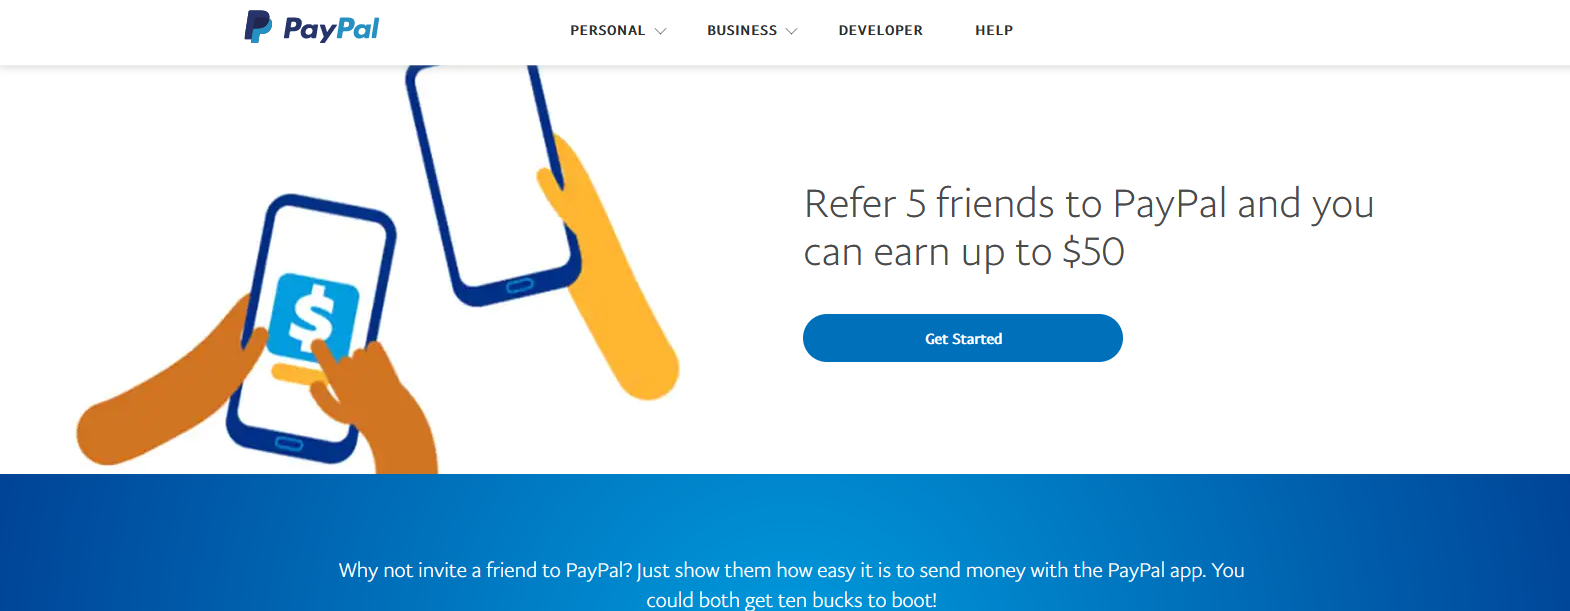 Get 10 for referring a friend on Paypal Webvator